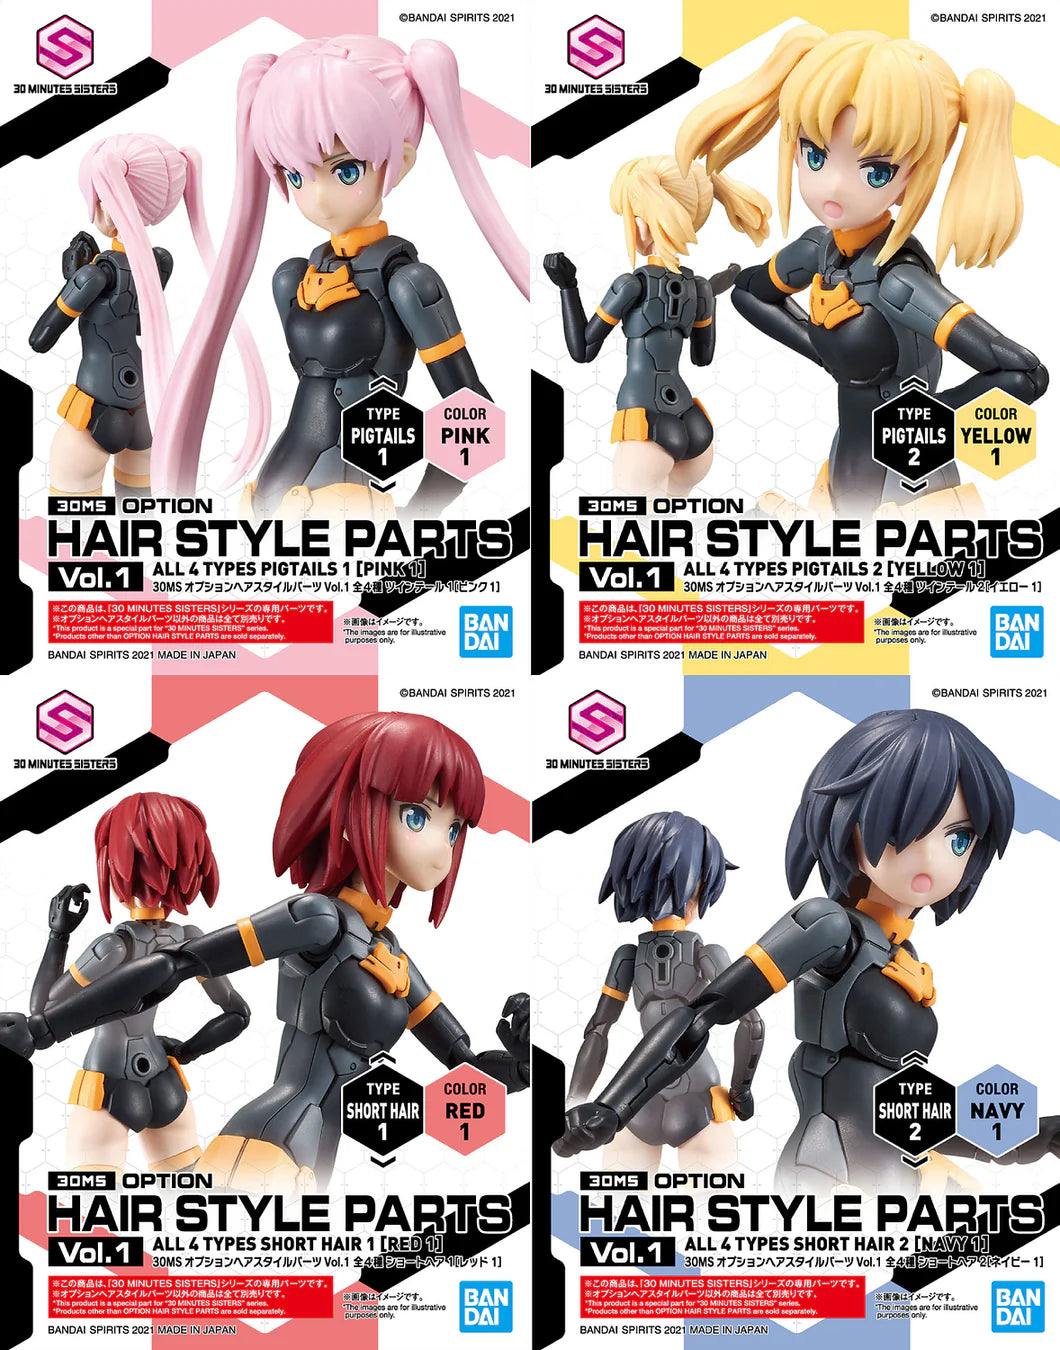 30MS : Option Hairstyle Parts Vol 1